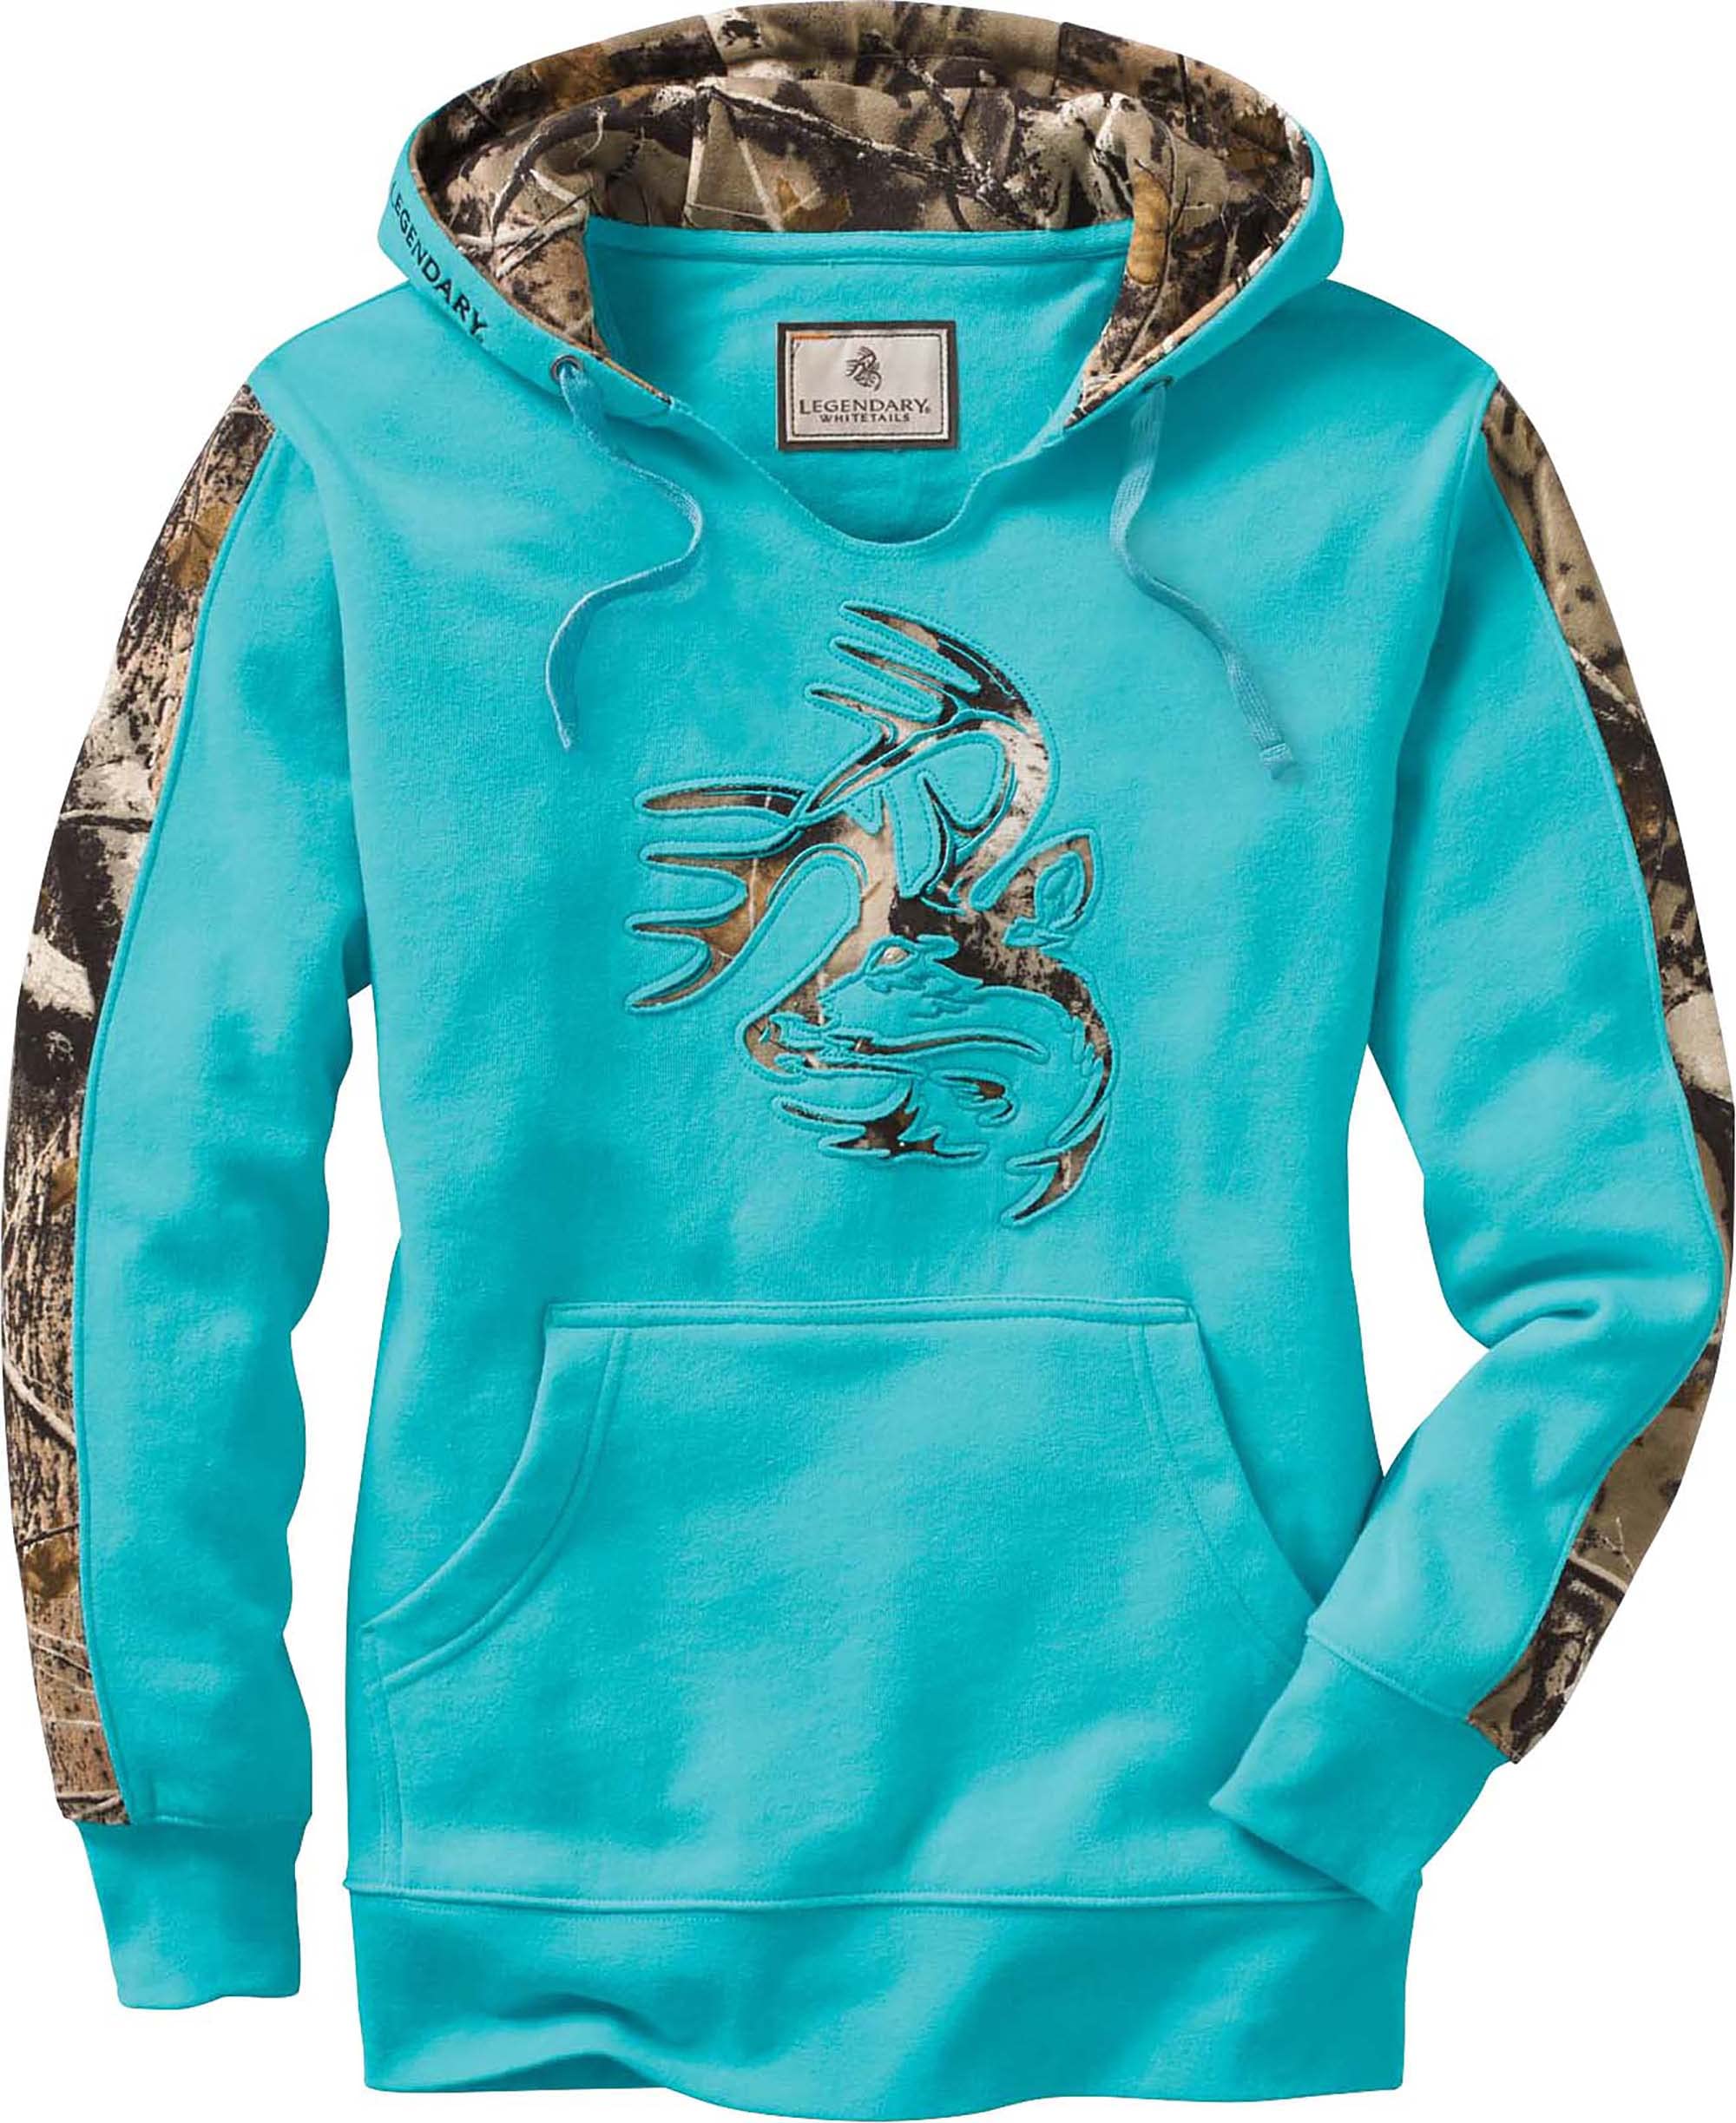 Legendary Whitetails Women's Camo Outfitter Hoodie